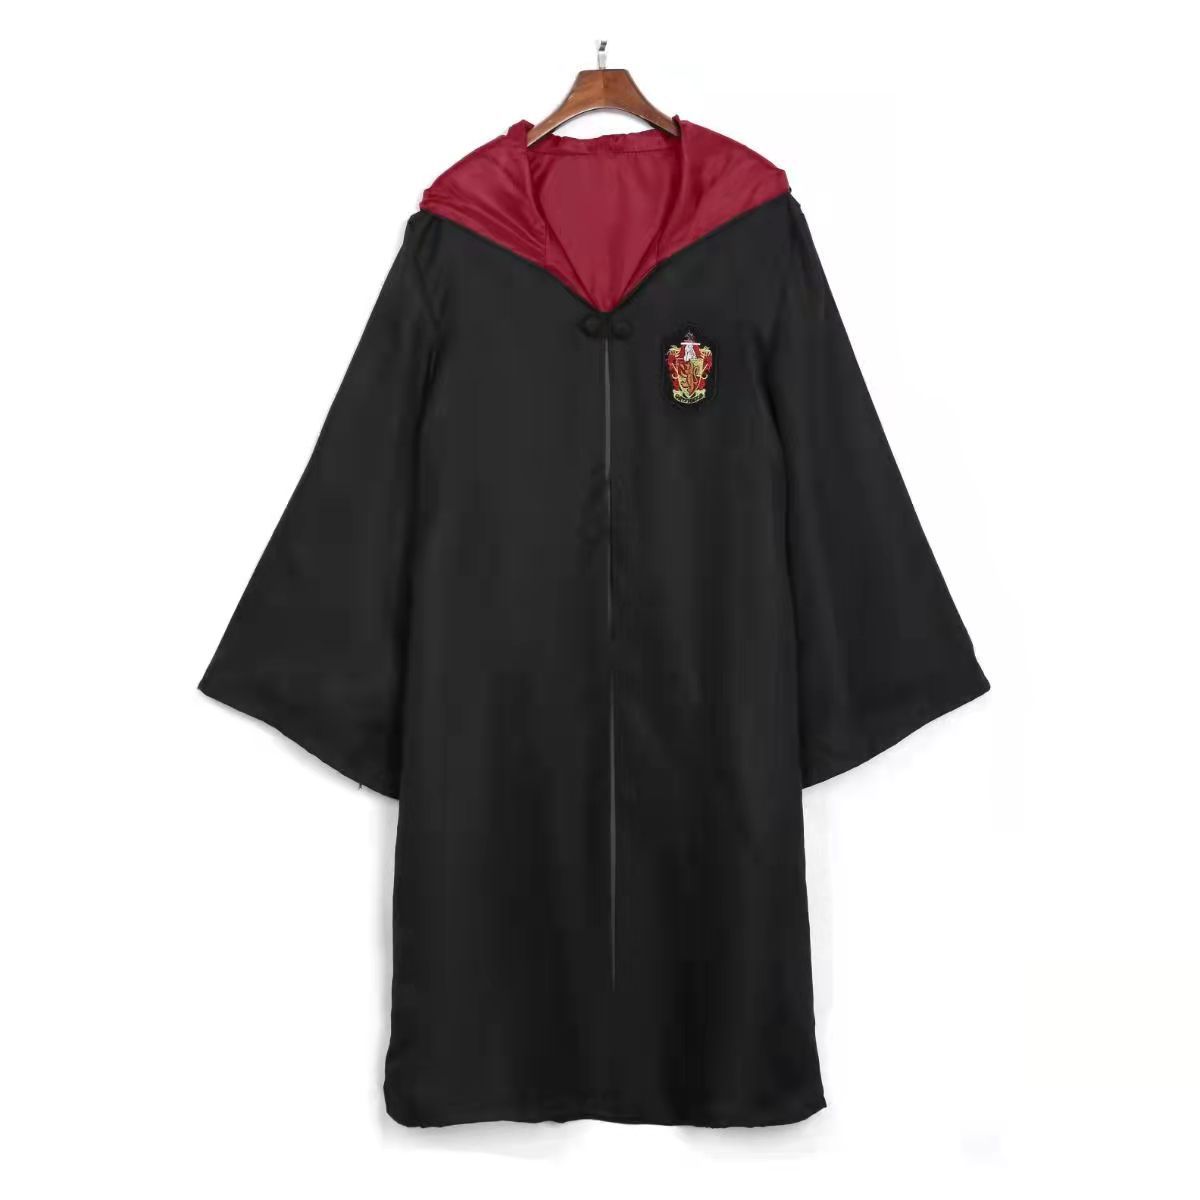 Harry Potter Magic Robes Cosplay Costume Cape Cape